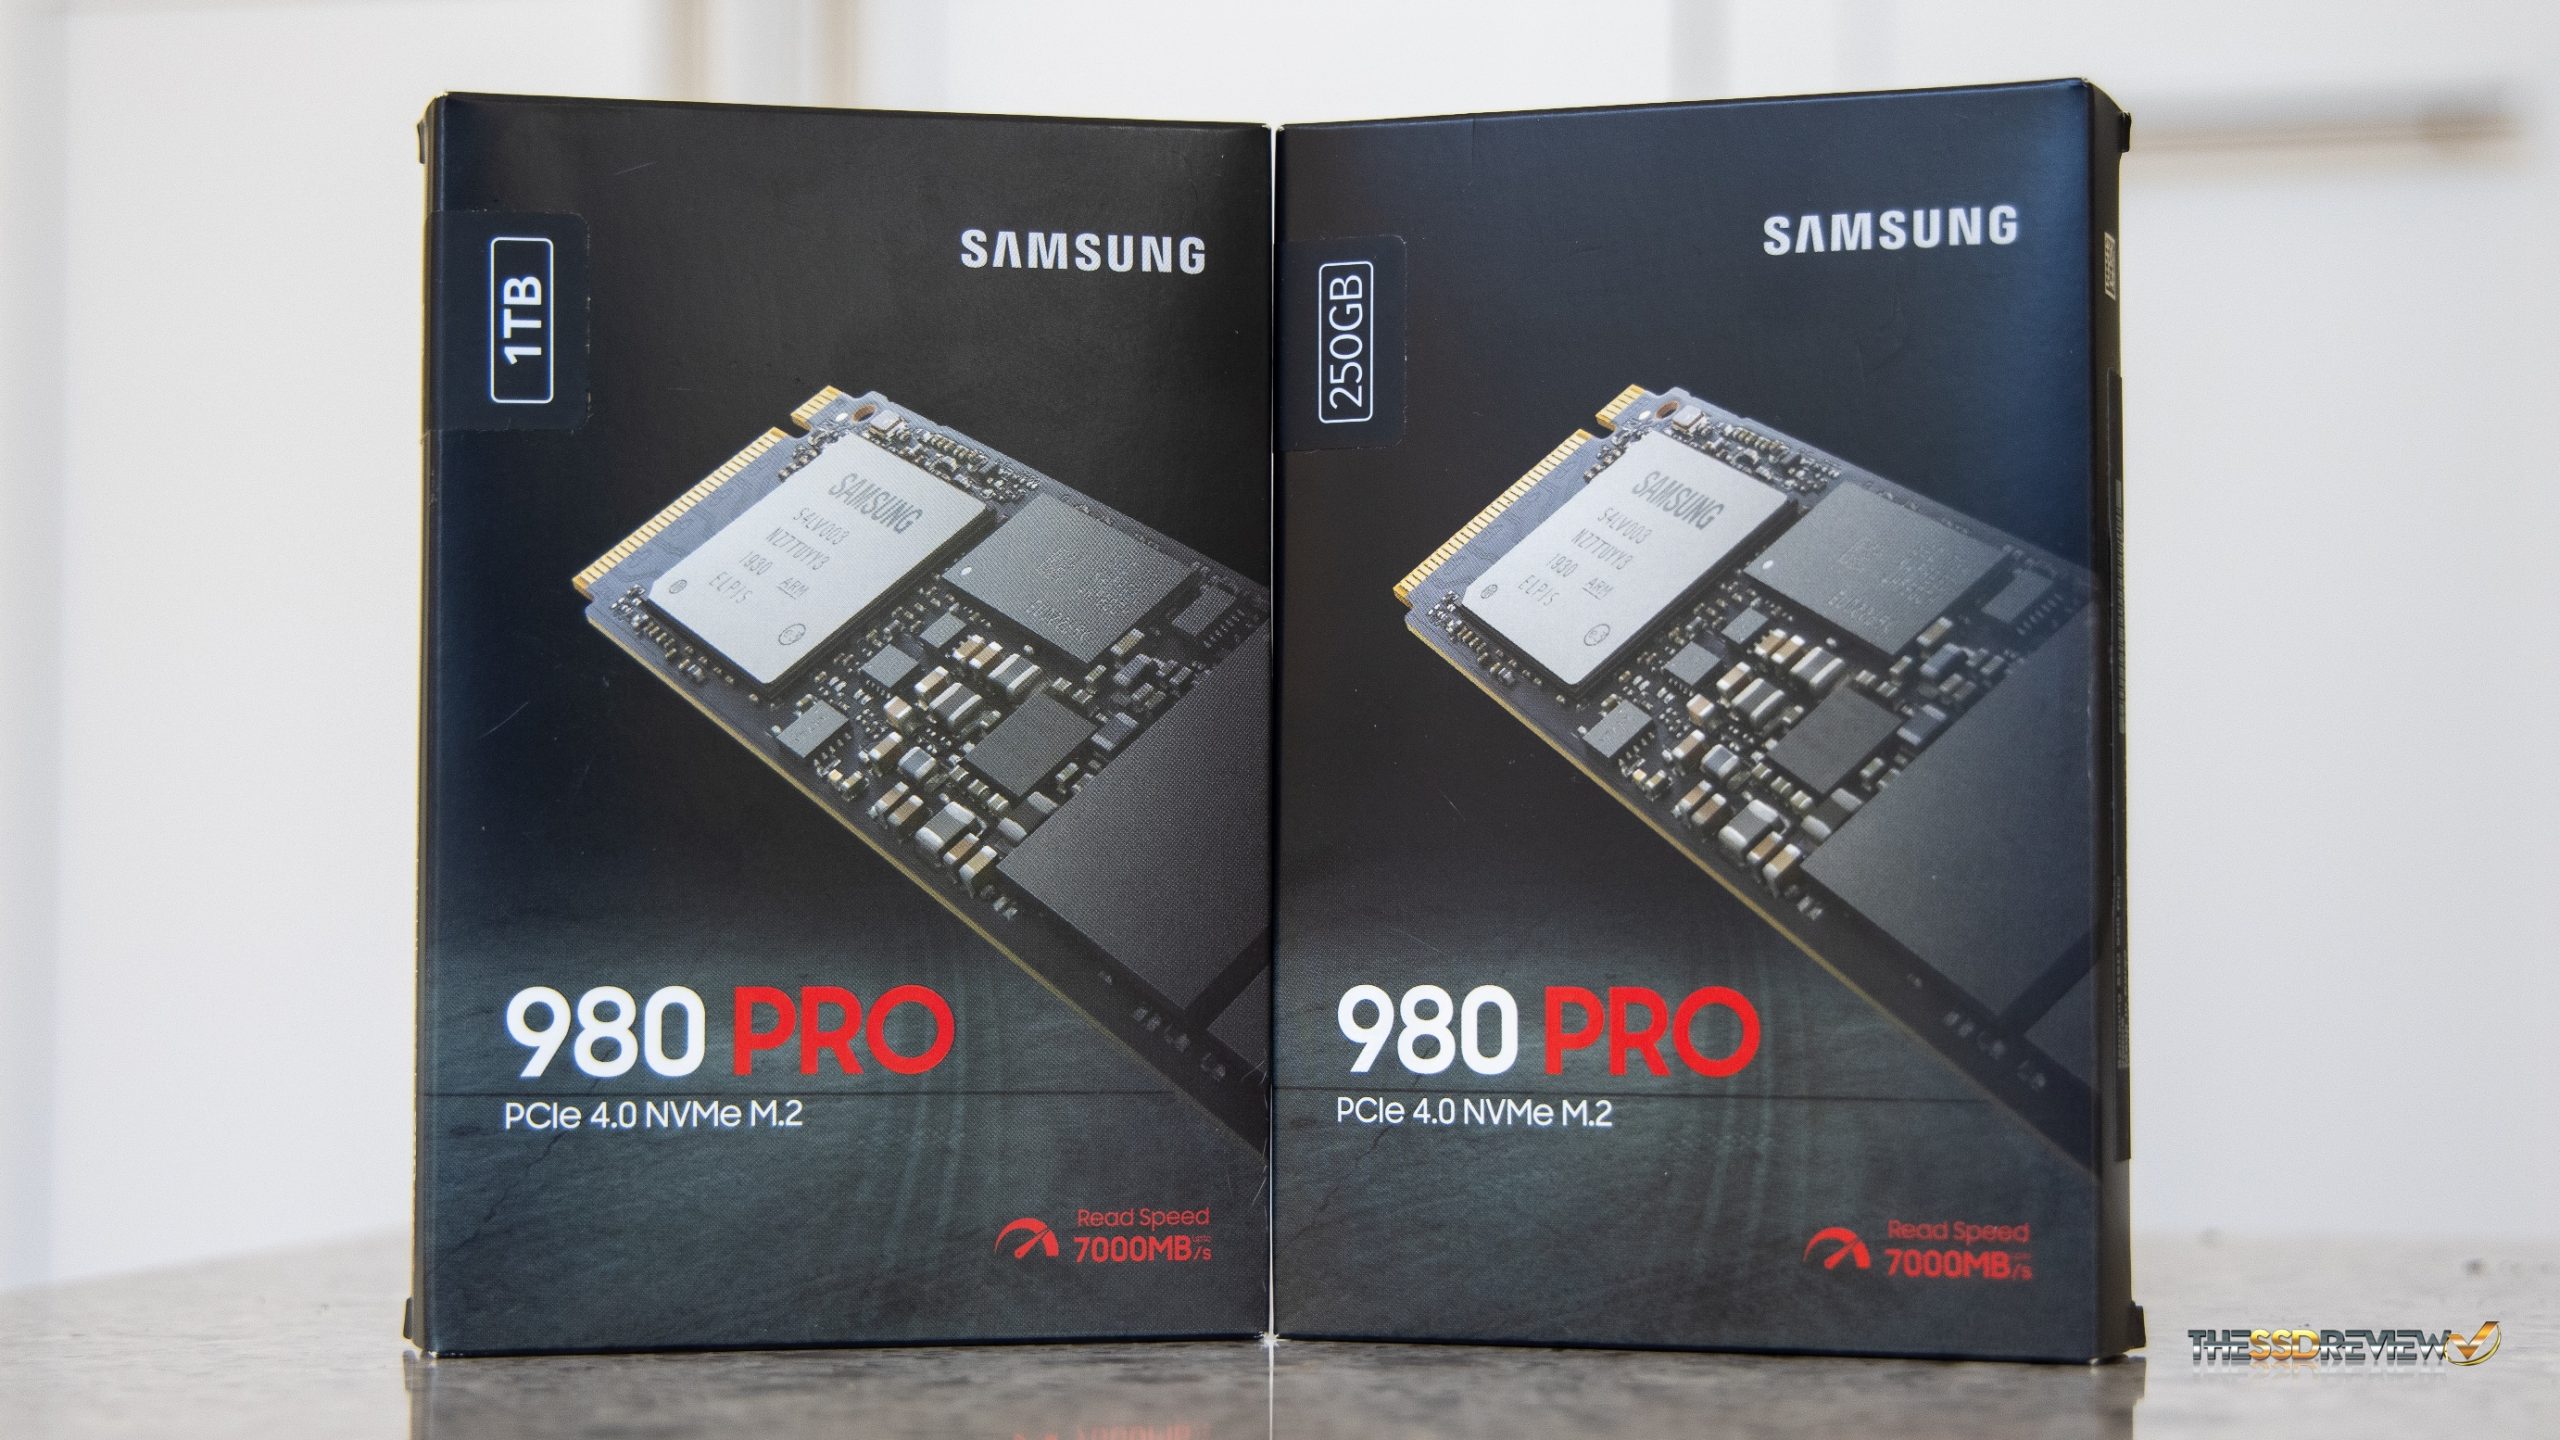 Samsung 980 Pro 250GB M.2 NVMe SSD Review